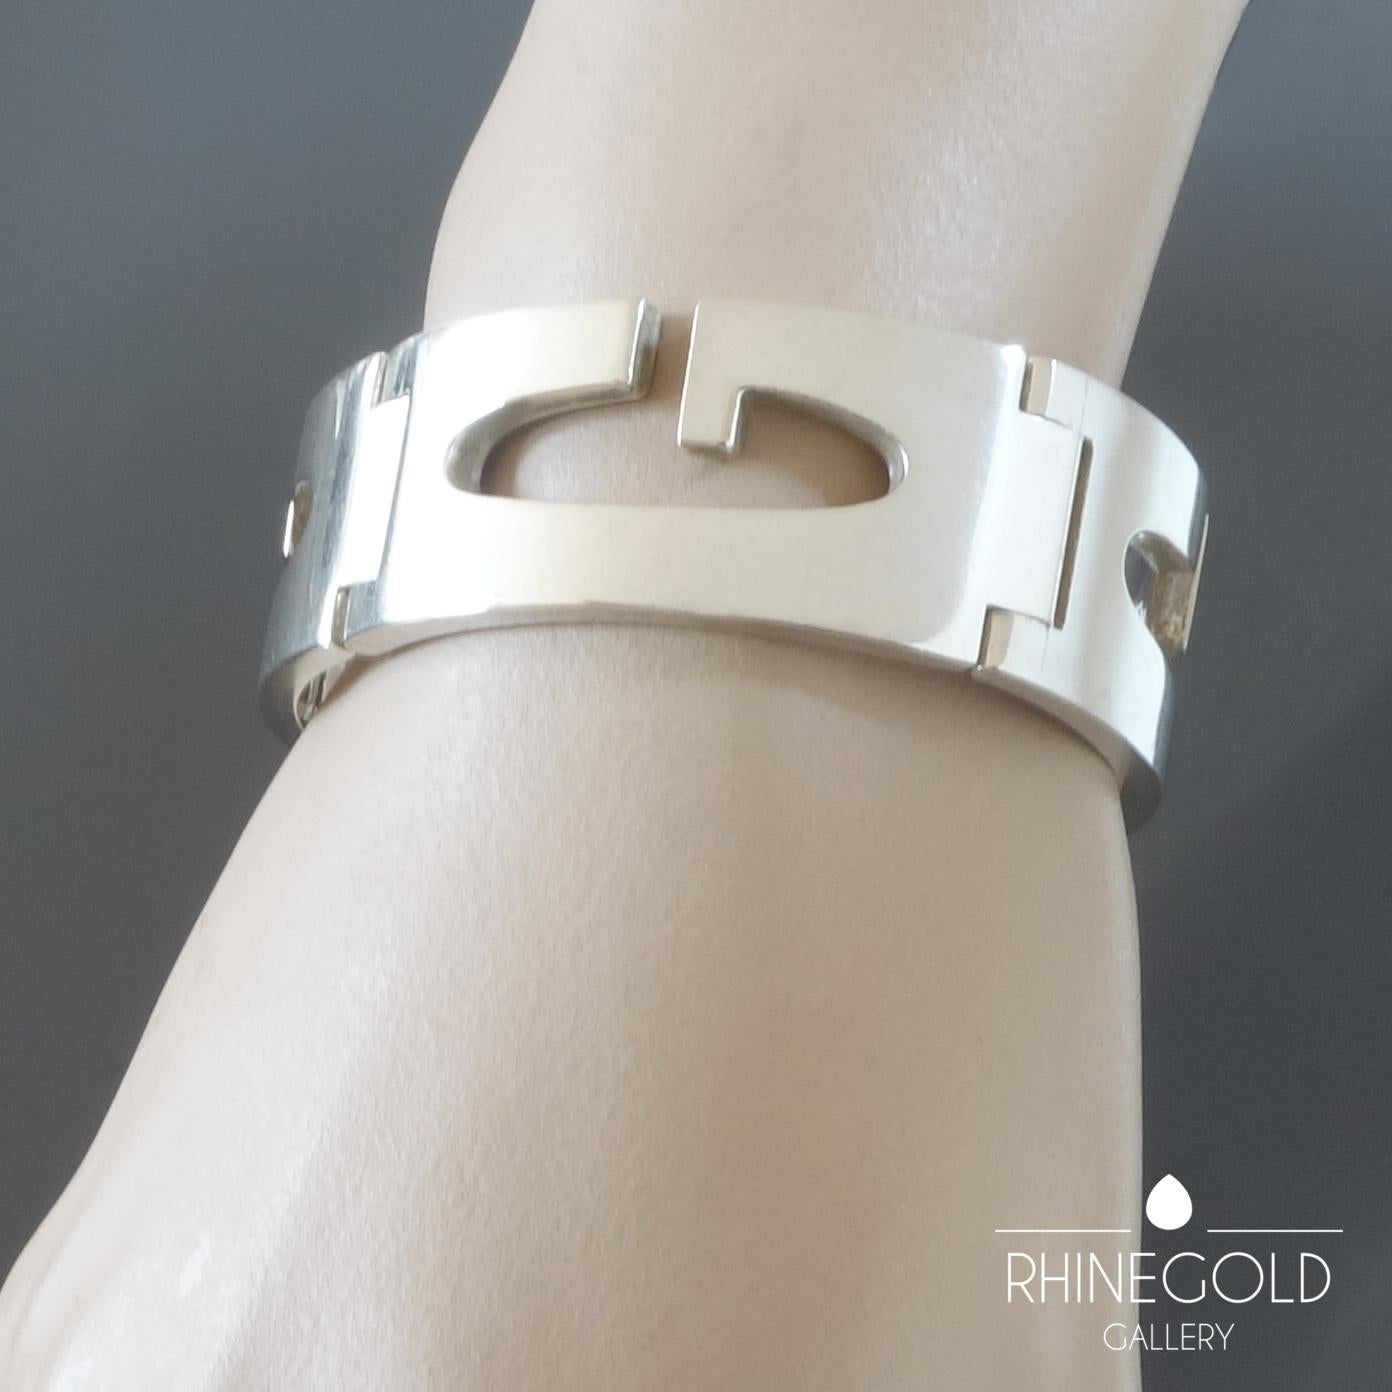 1970s GUCCI MidCentury Modernist Silver Link Bracelet
Sterling silver
Length (when closed) 17.5 cm (approx. 6 7/8”), width 1.95 cm (approx. 3/4”)
Weight approx. 86 grams
Marks: ‘GUCCI  MADE IN ITALY’; silver content mark ‘925’ for sterling silver;